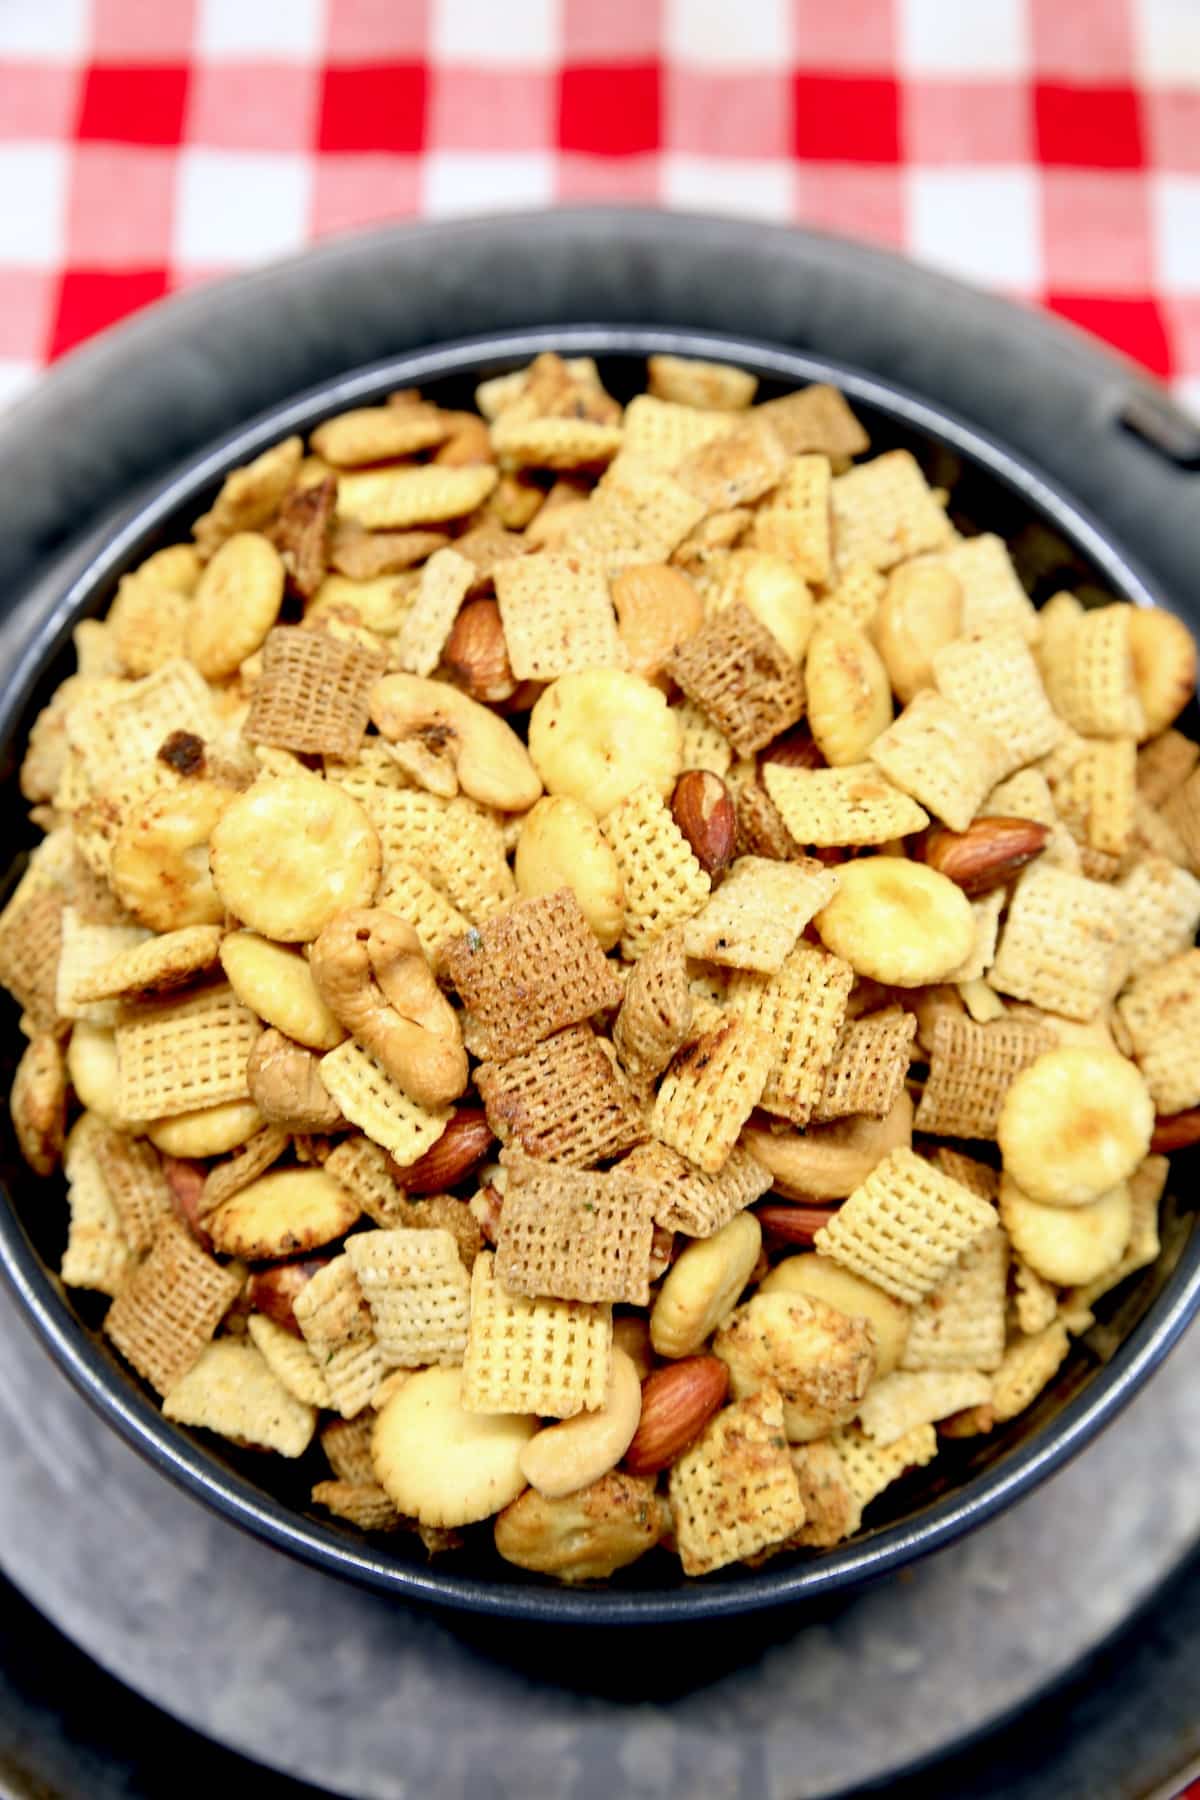 Bowl of chex mix on red check cloth.